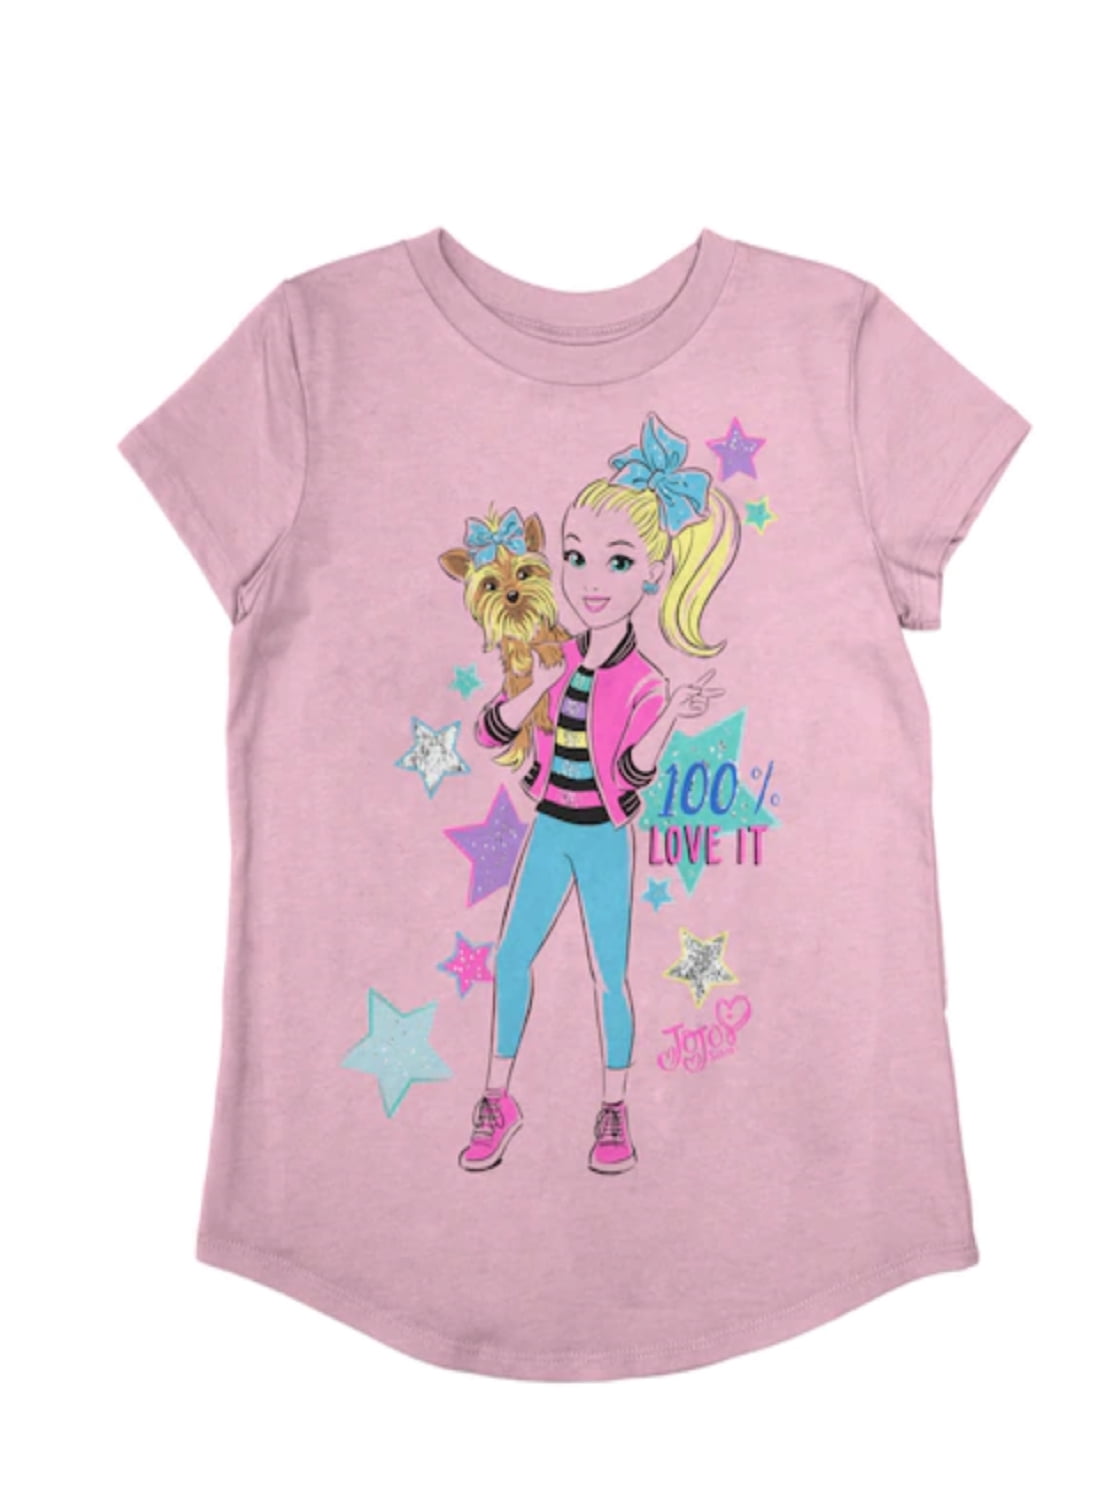 cool tees for girls